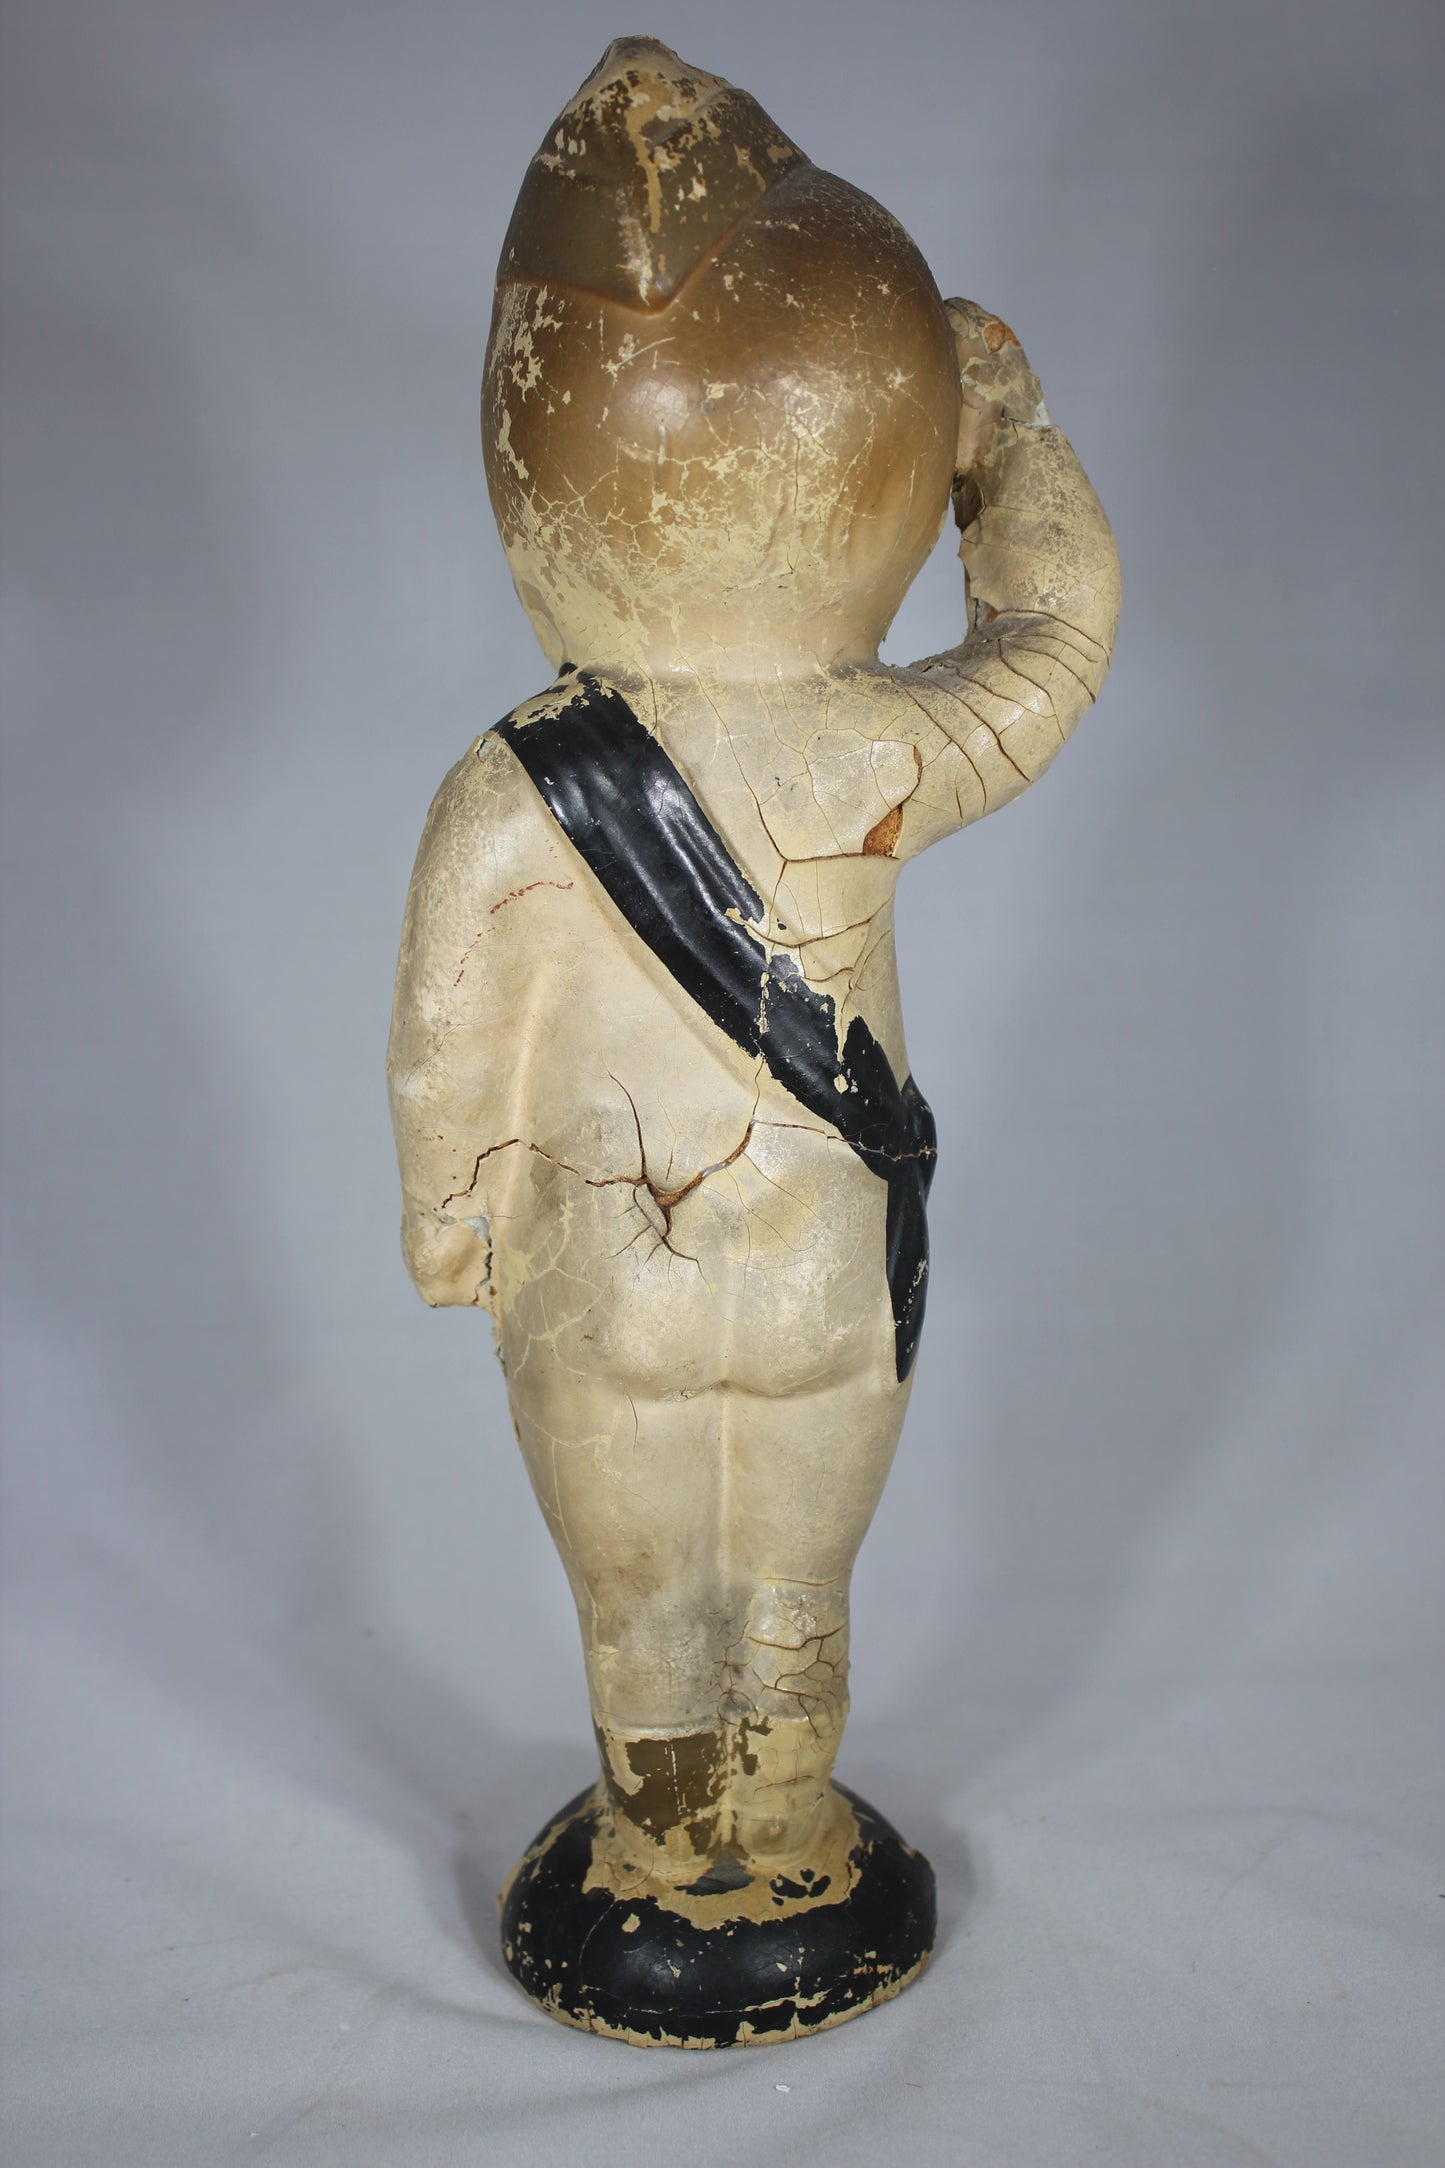 Antique Saluting Kewpie 13" Composition Doll with Military Hat and Blue Sash, 1920s